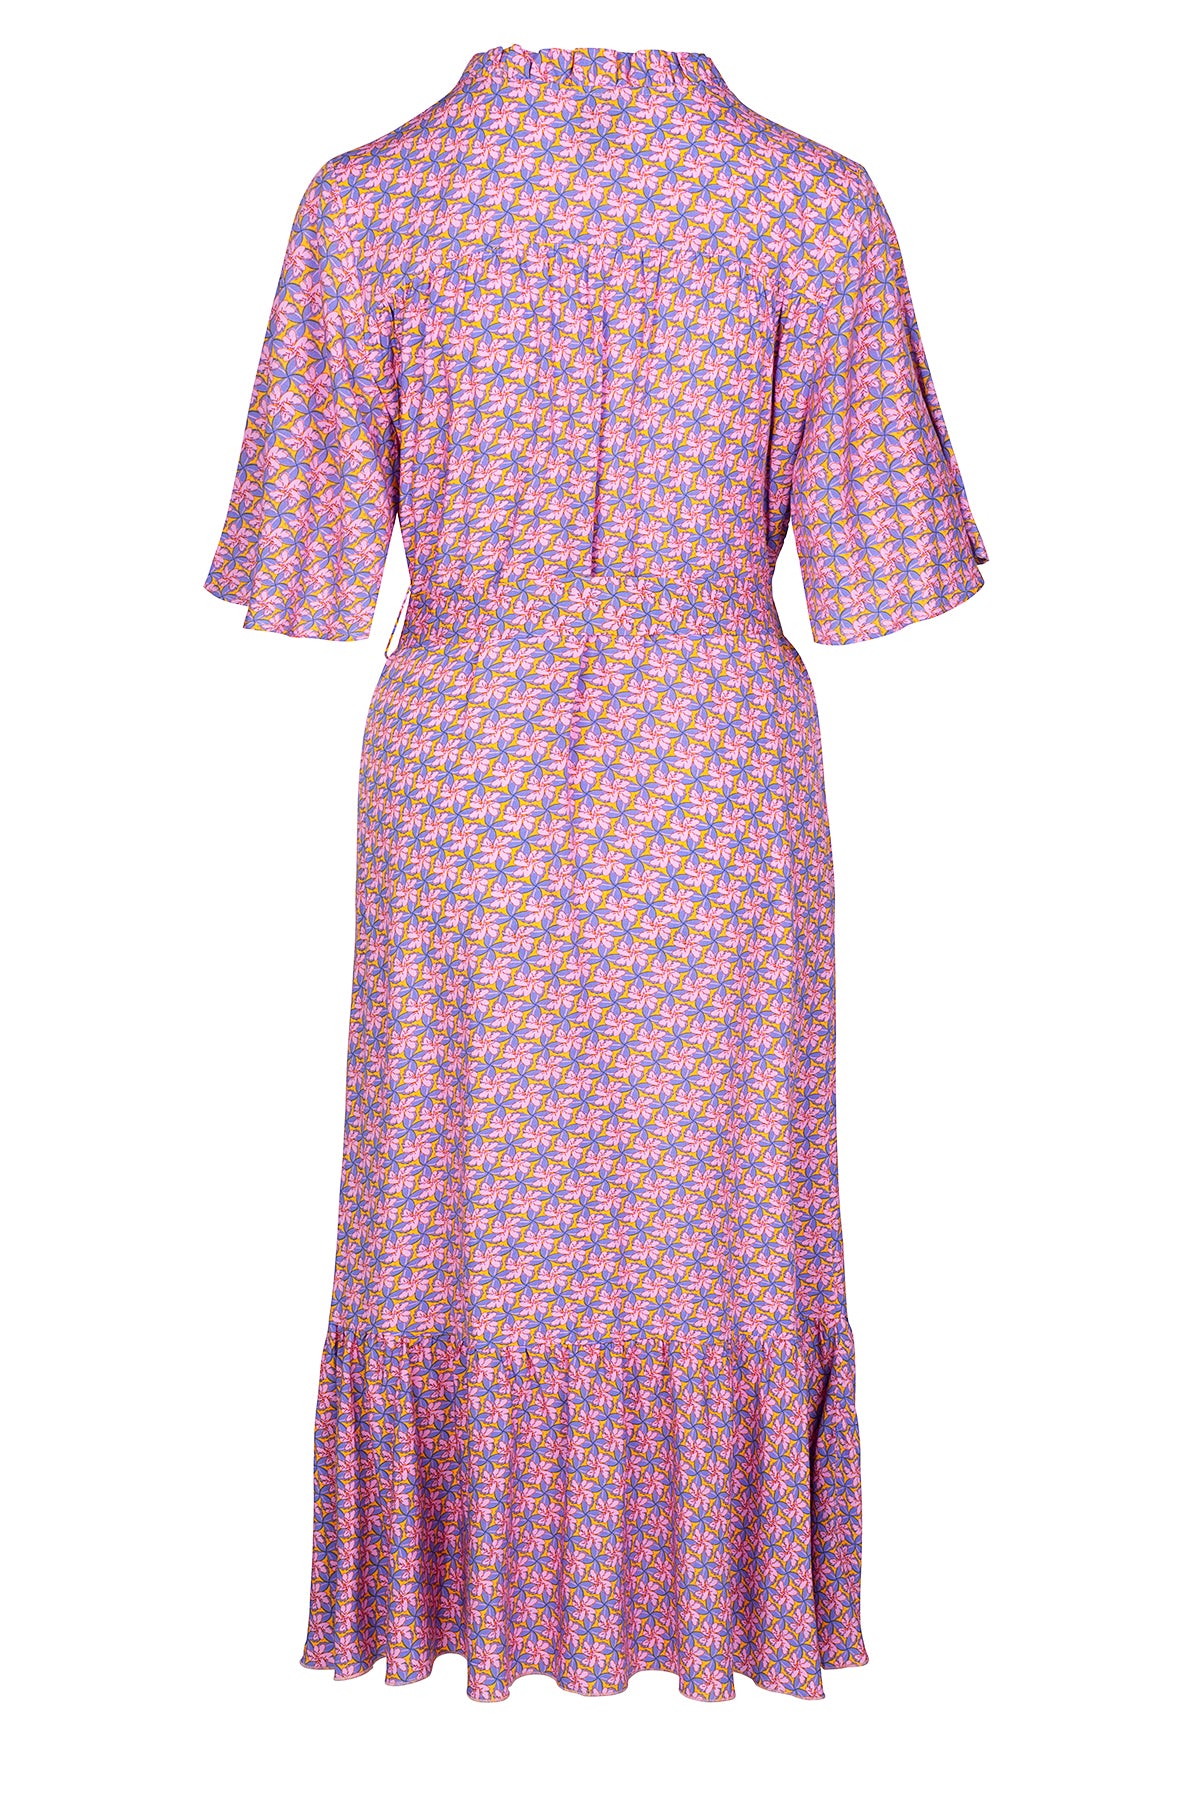 LUXZUZ // ONE TWO Ilsebet Dress Dress 328 Pink Lavender